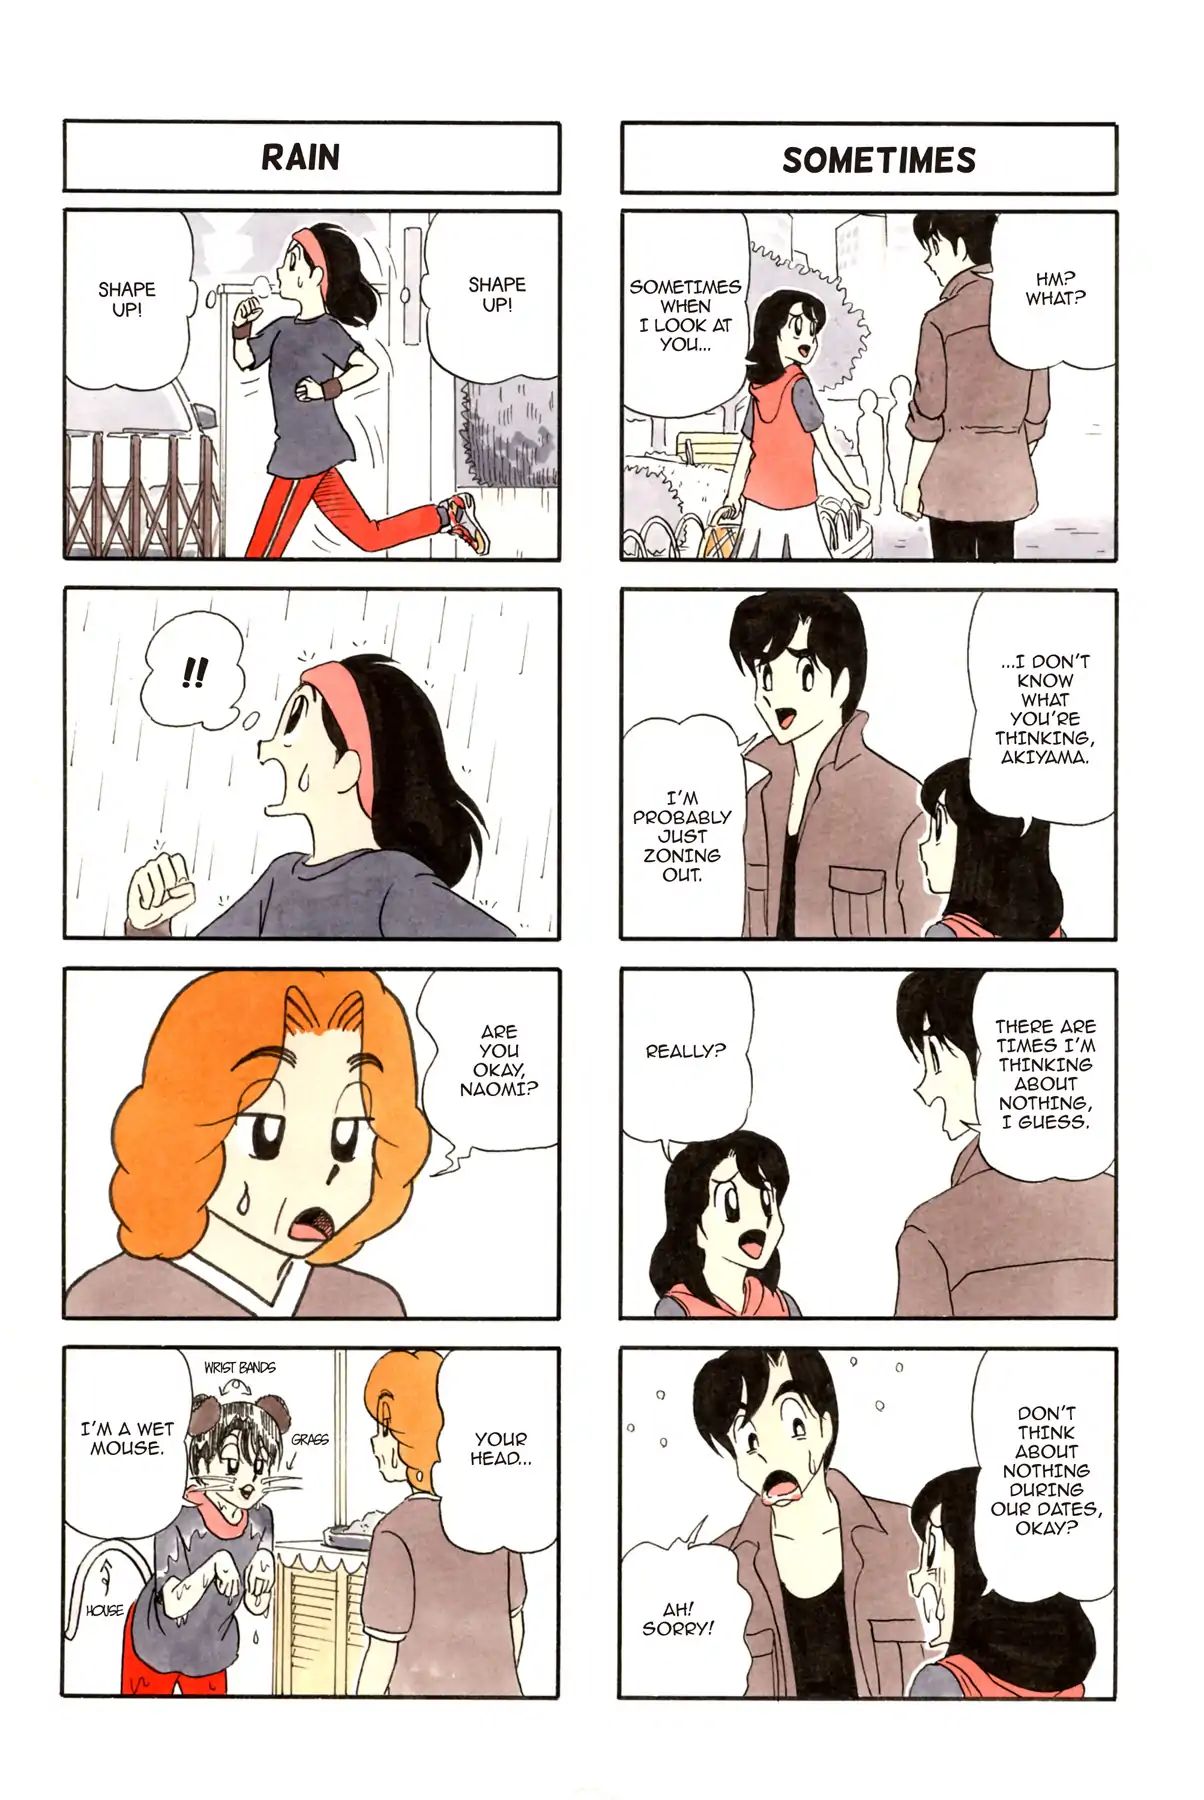 It's Naomi, Okay? After 16 - chapter 30 - #2